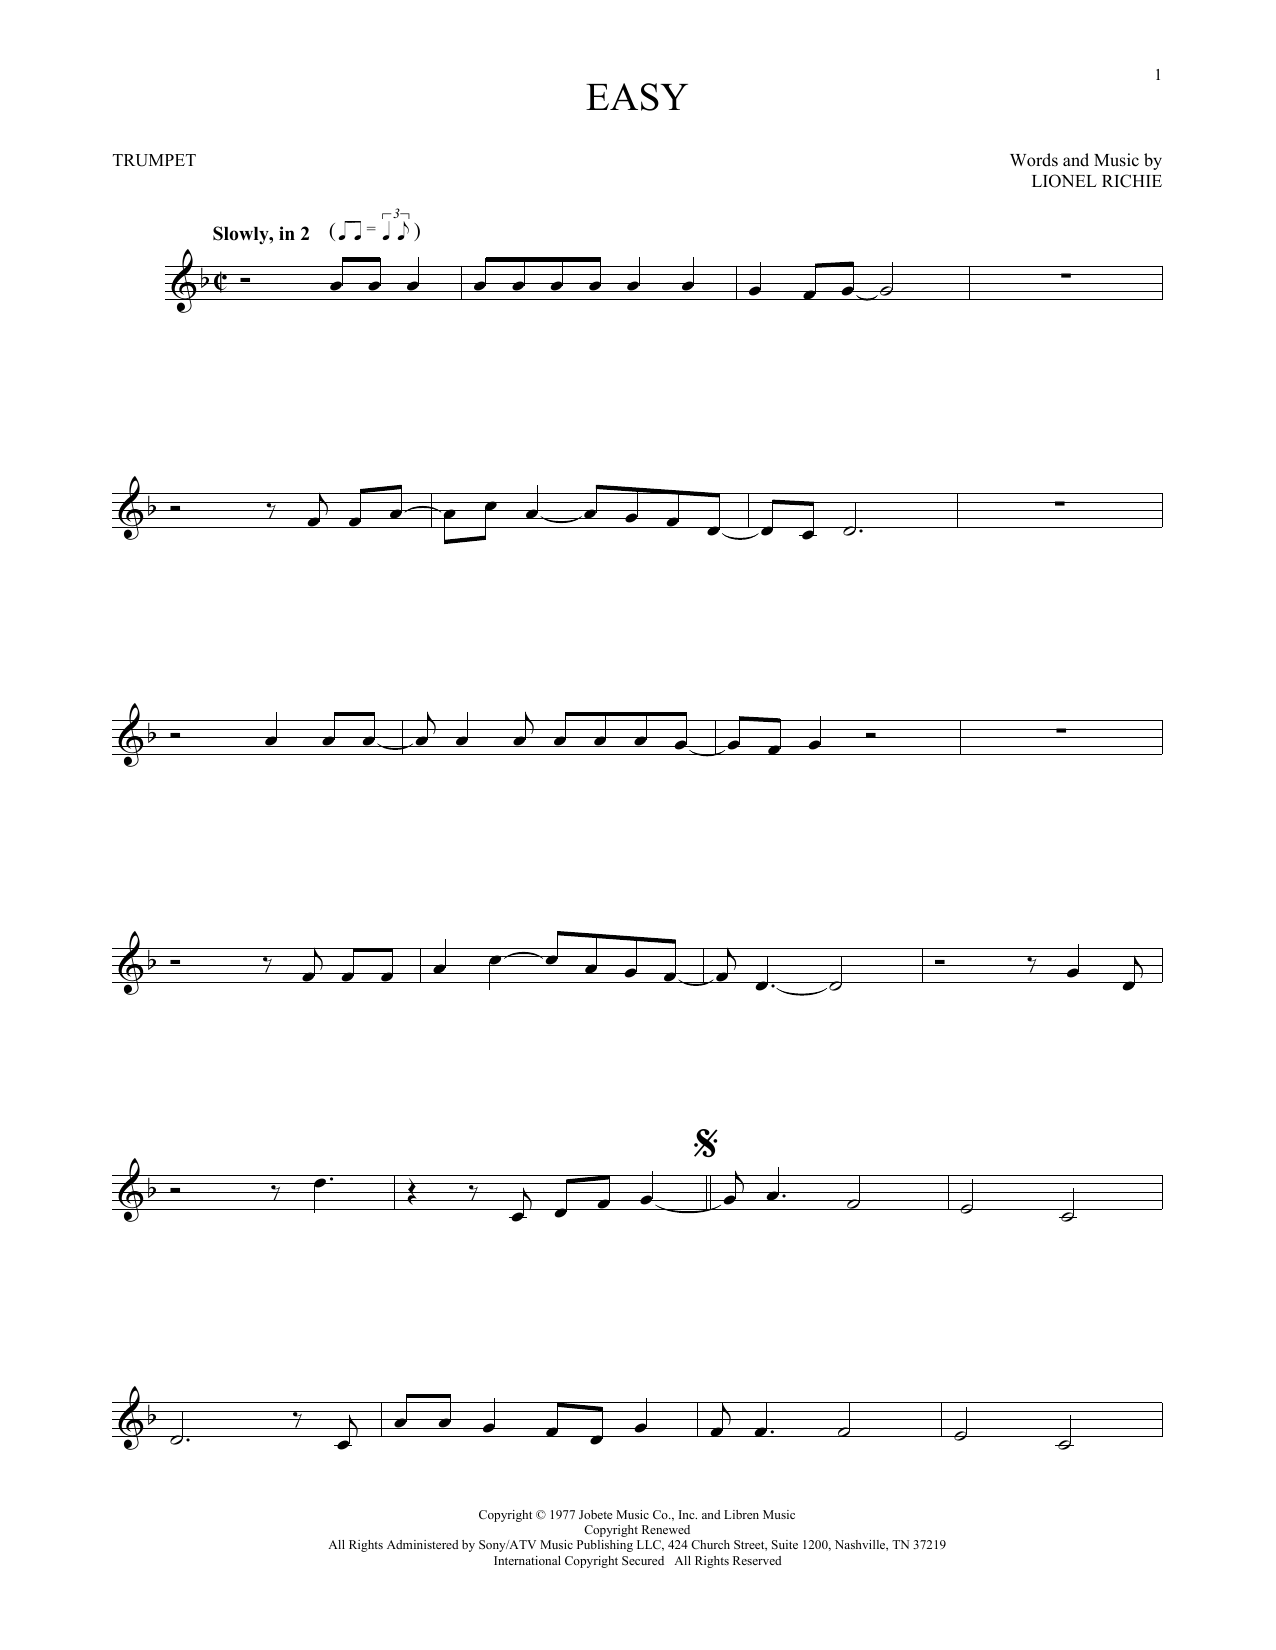 Download The Commodores Easy Sheet Music